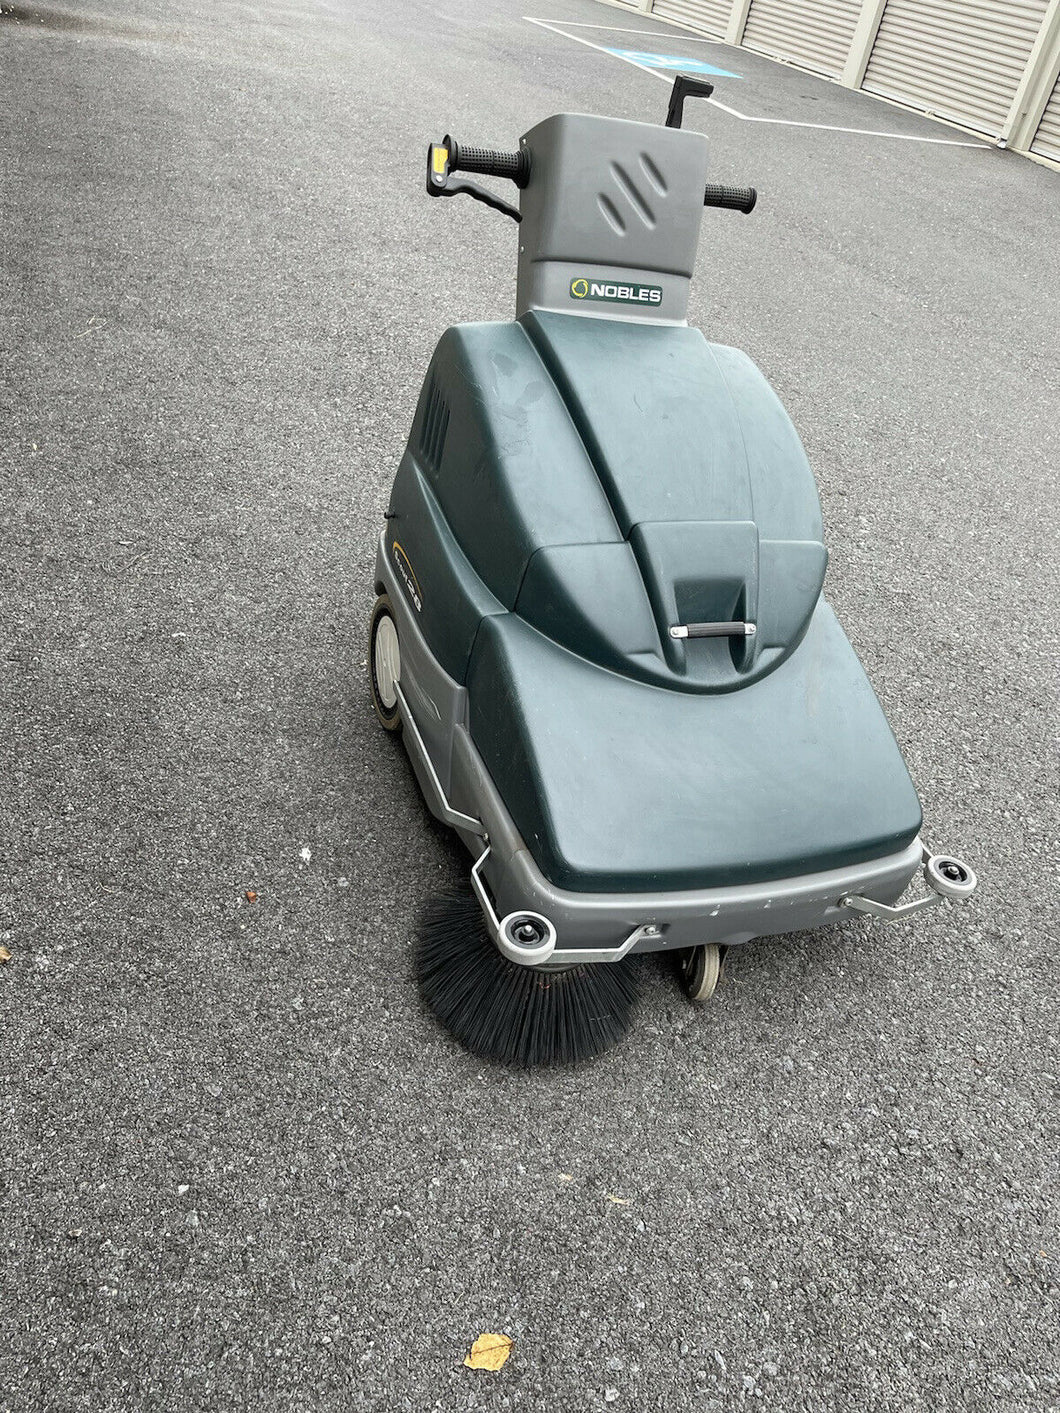 Nobles Scout 28 Battery Powered Walk Behind Floor Sweeper New Battery